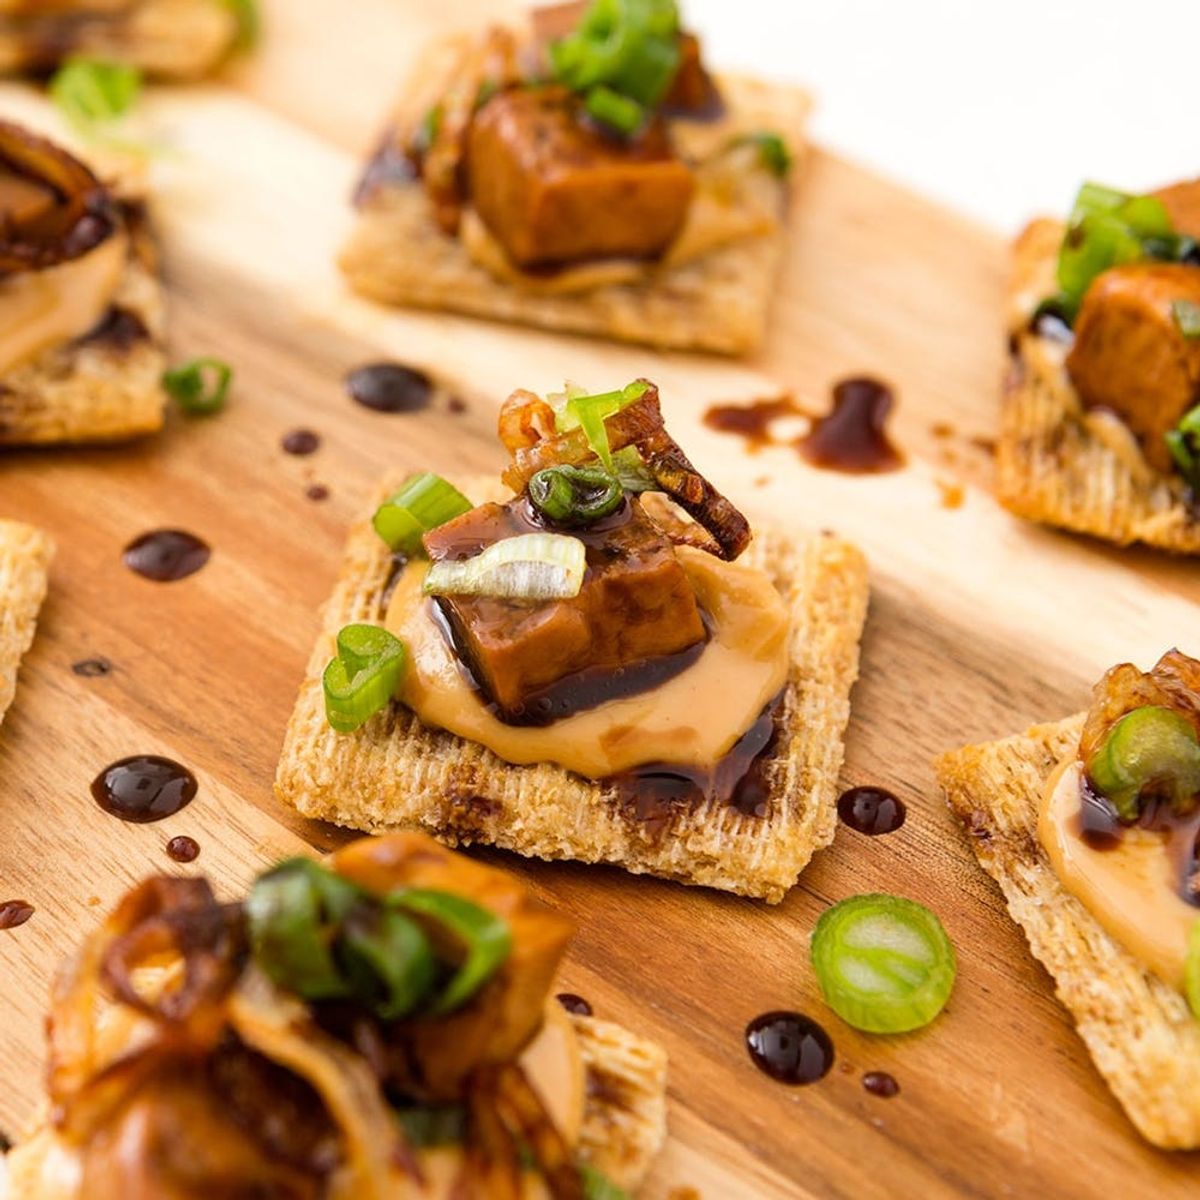 Our Latest TRISCUIT Recipe Is Inspired by a Rad Food Artisan